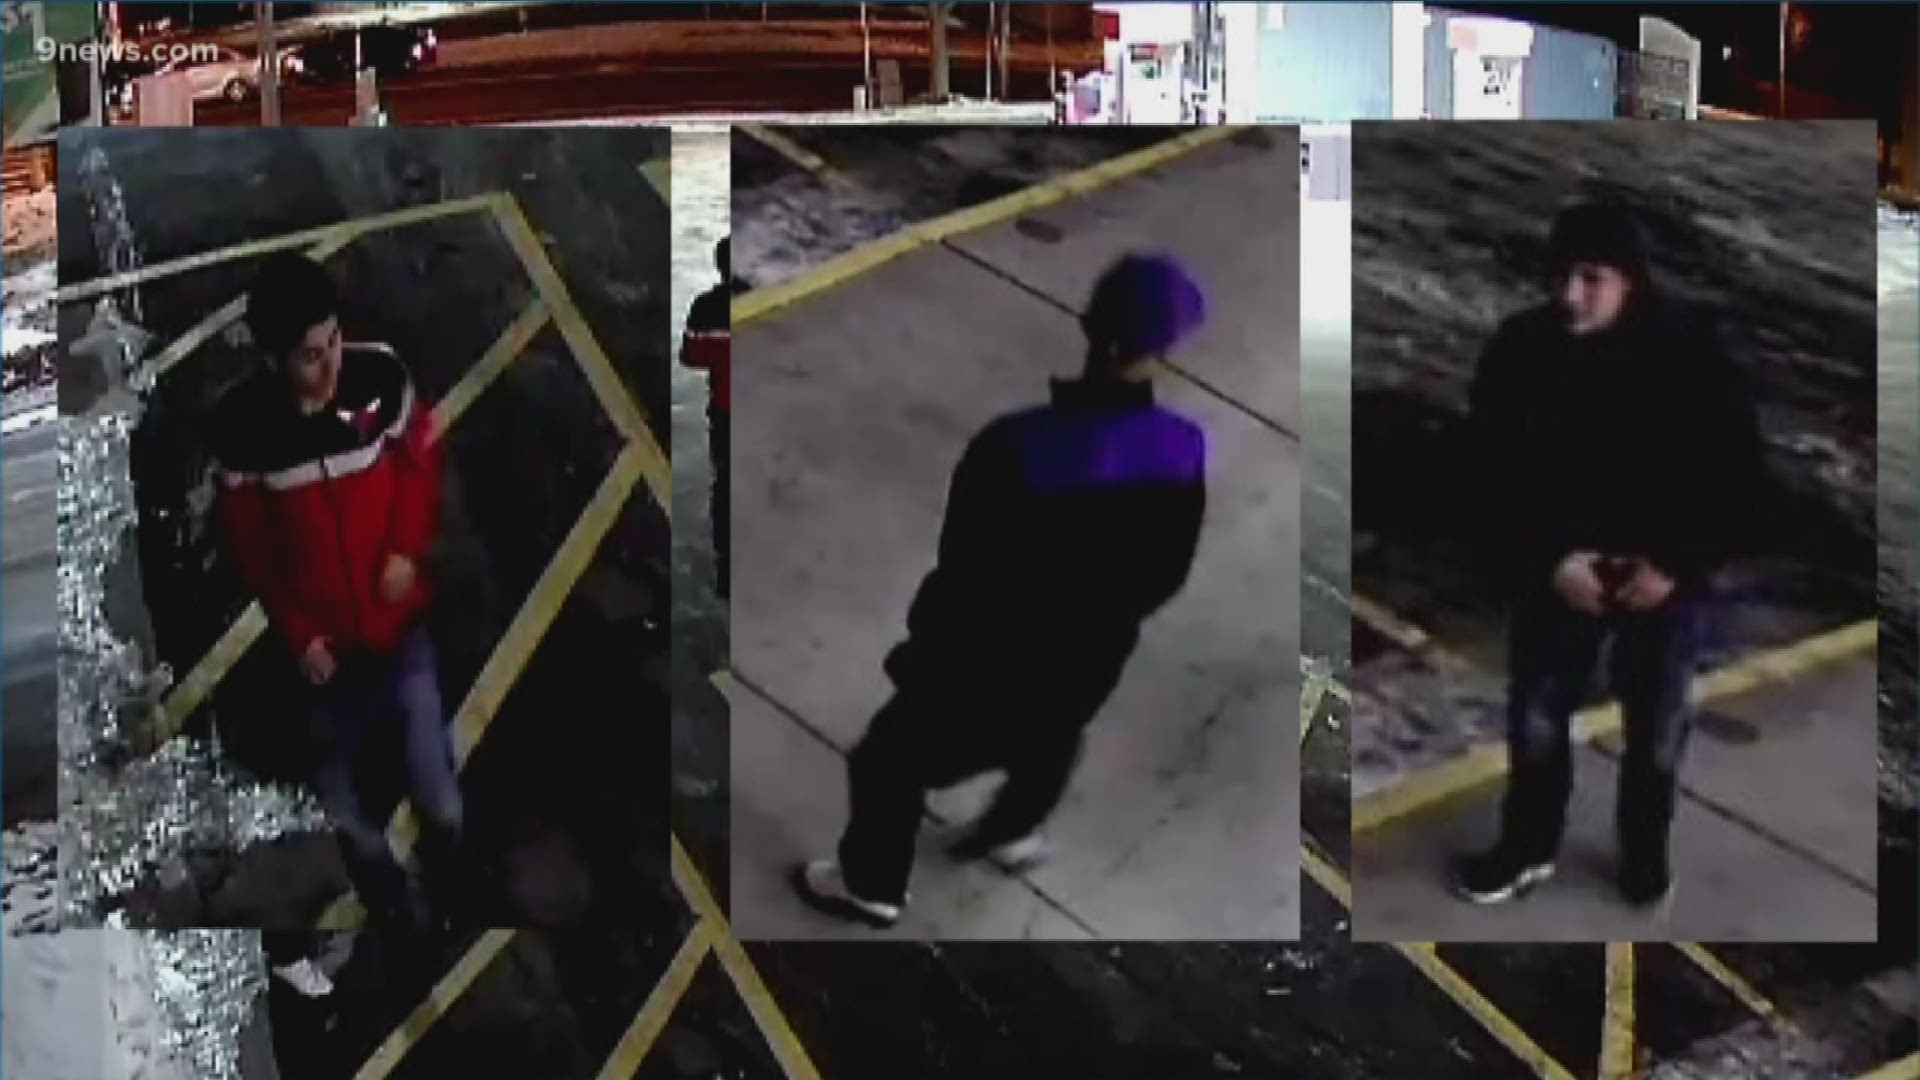 Denver Police said they are looking for three suspects shown in security camera footage.